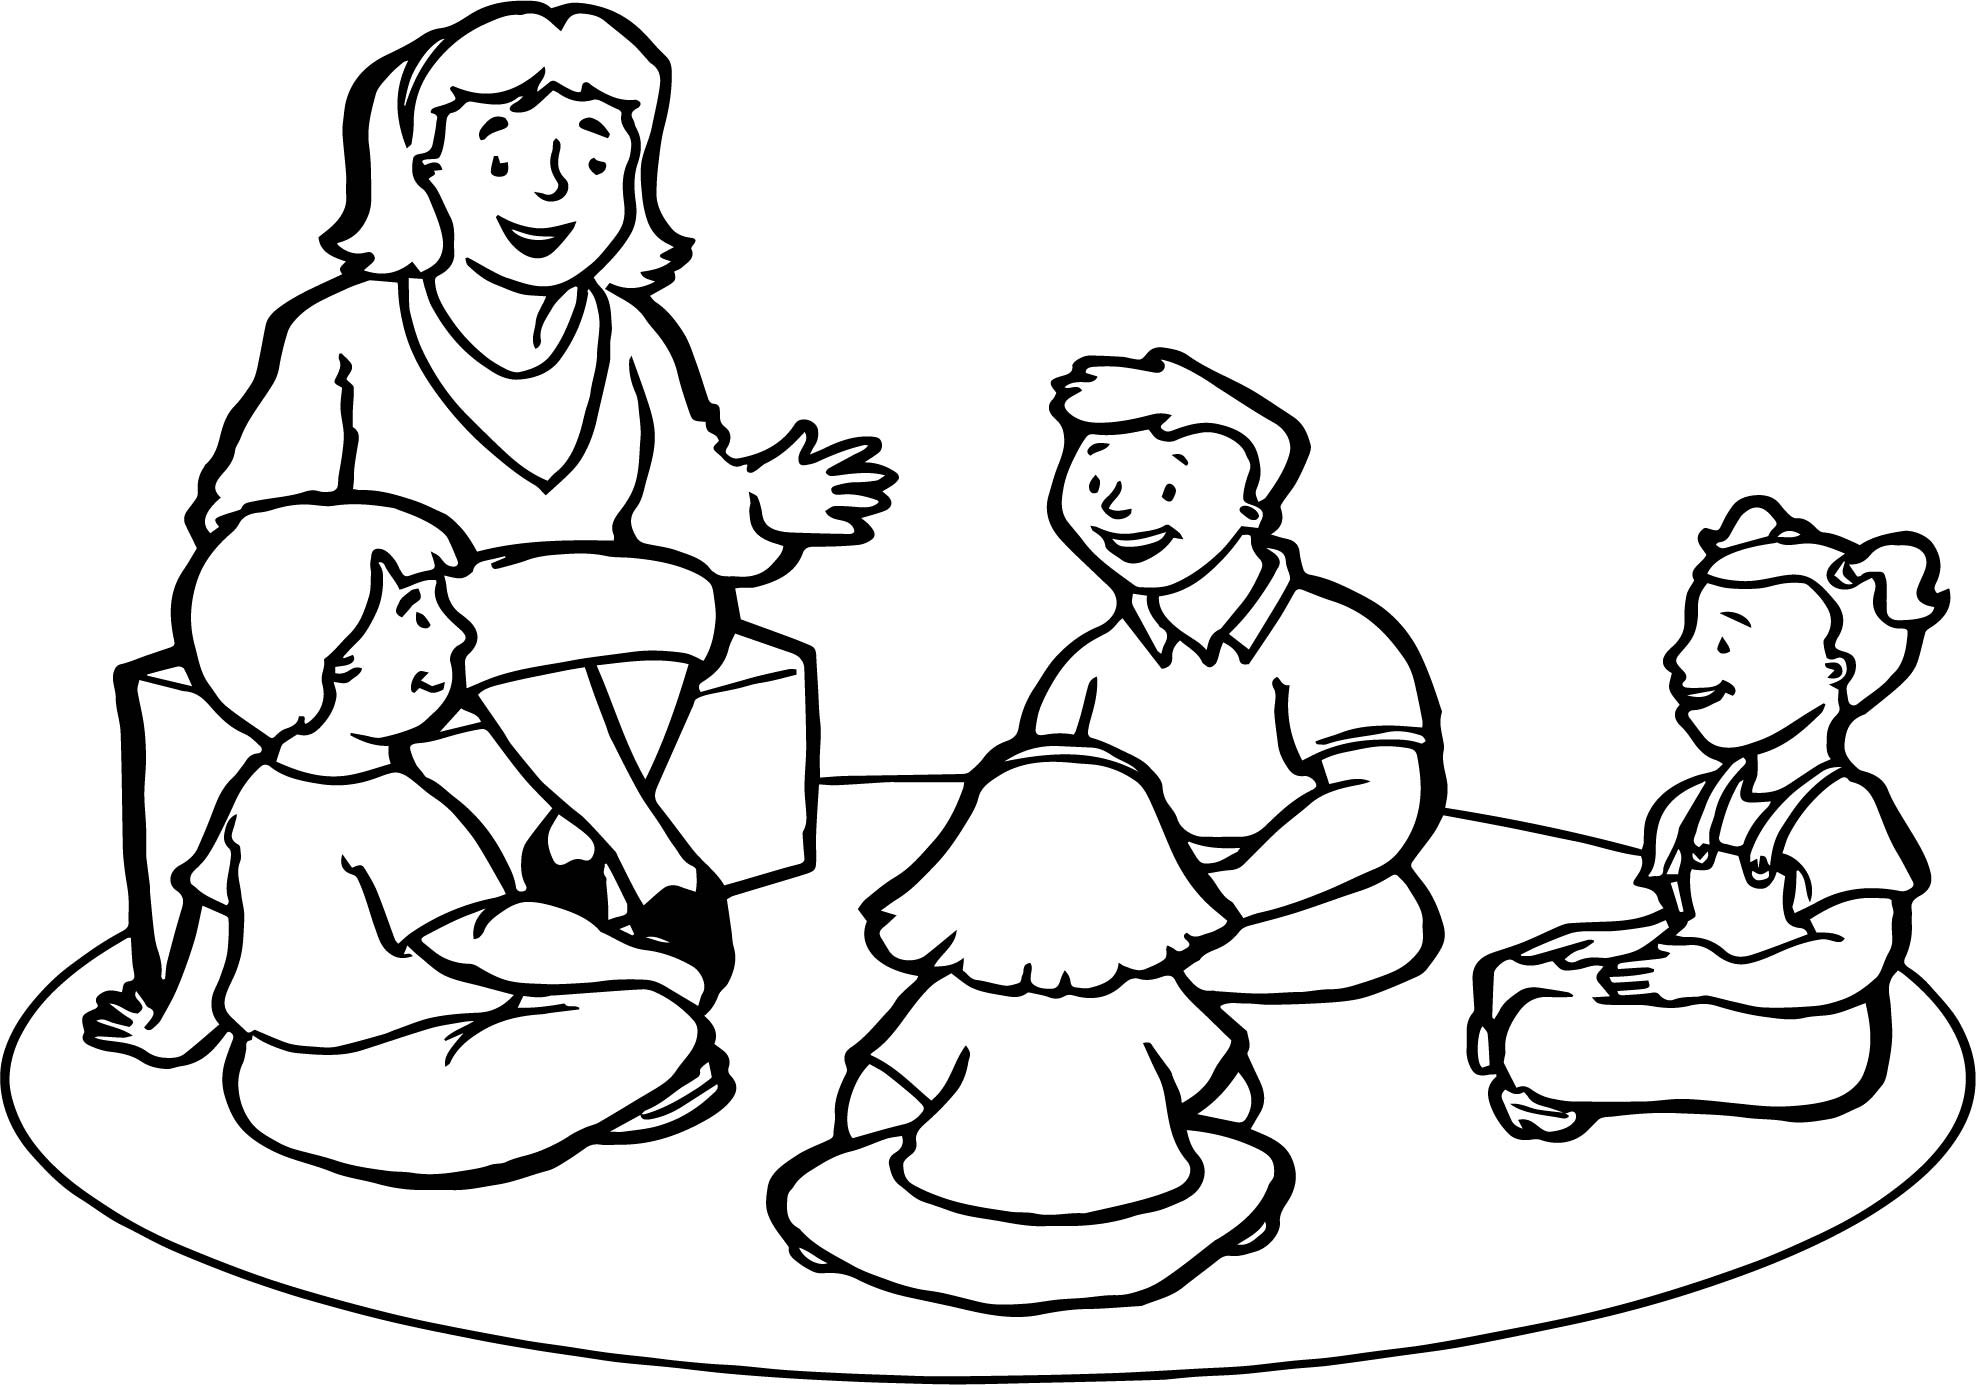 Teaching Coloring Pages
 English Teacher Childrens Coloring Page